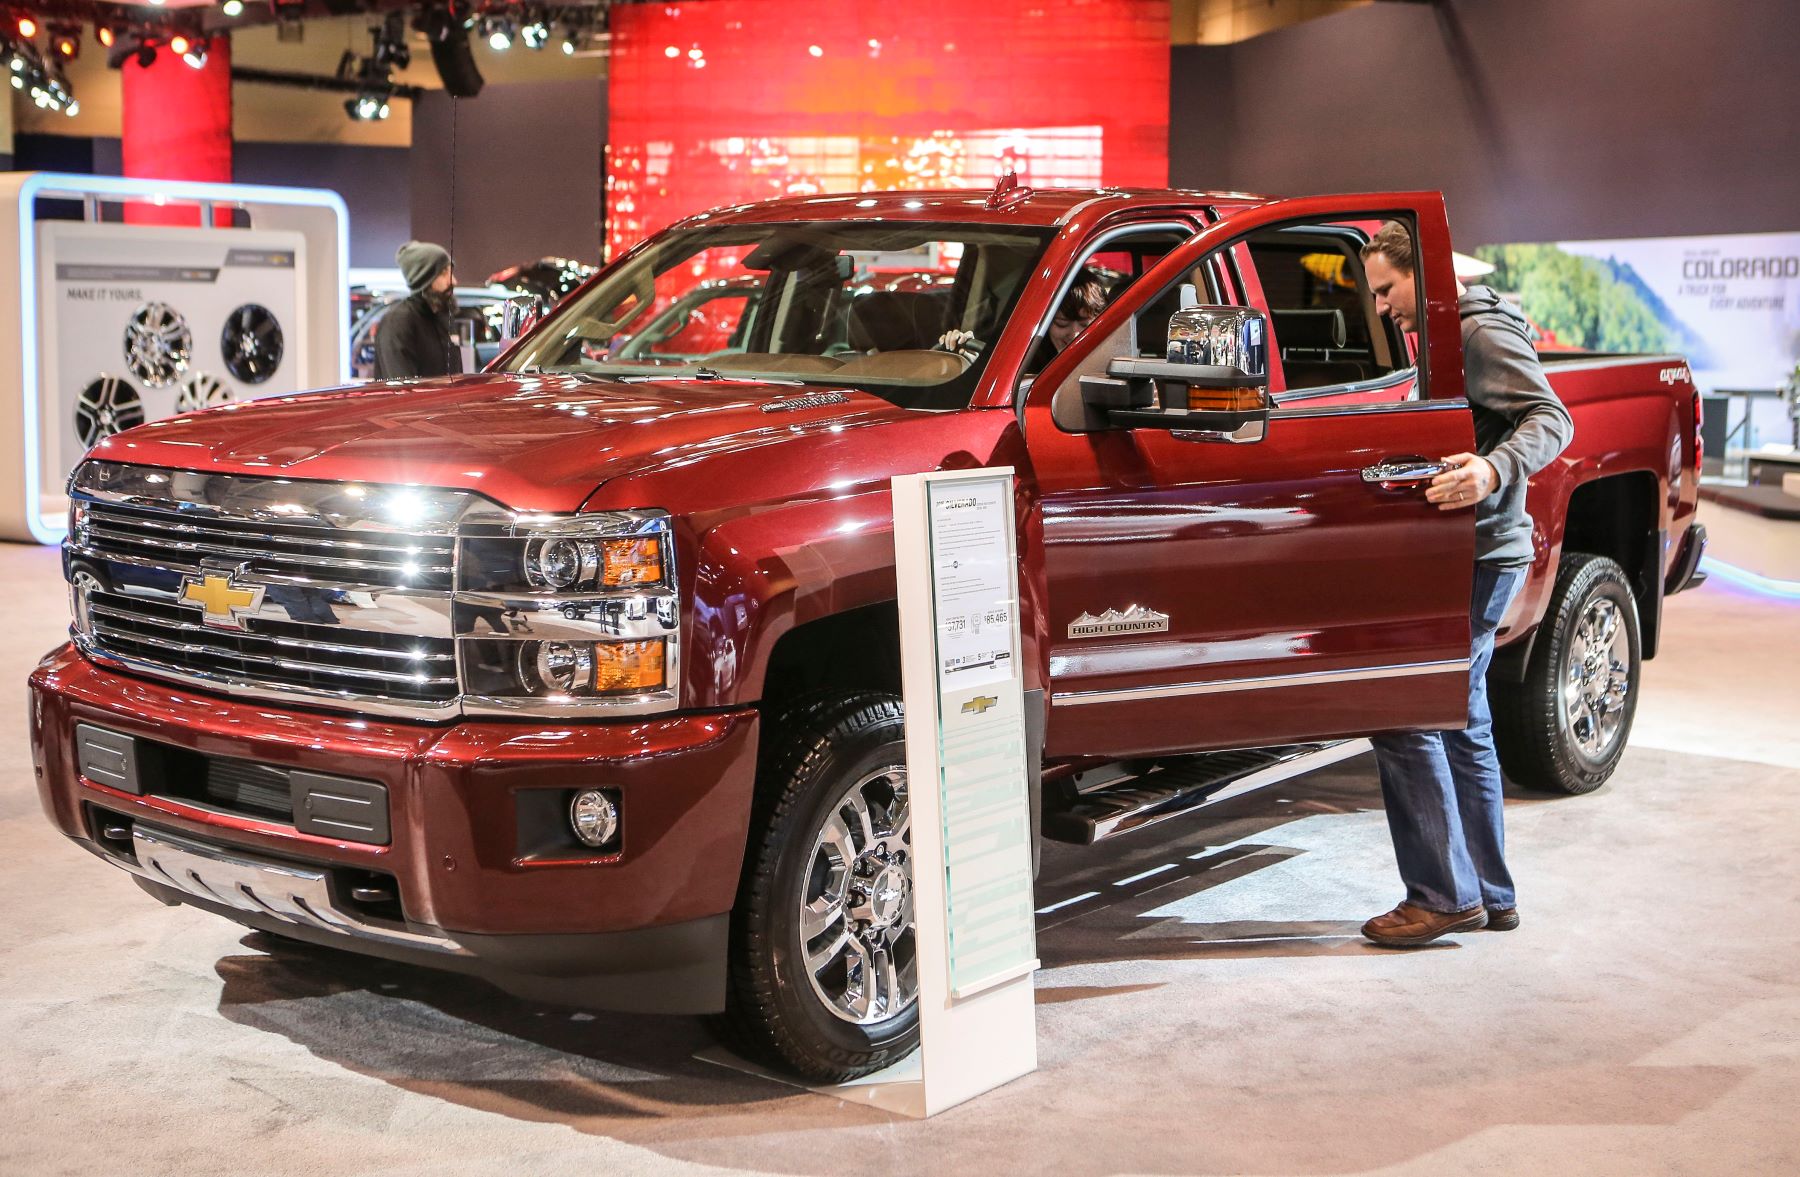 A 2015 Chevy Silverado 2500HD High Country Diesel pickup truck model at the Canadian International Auto Show